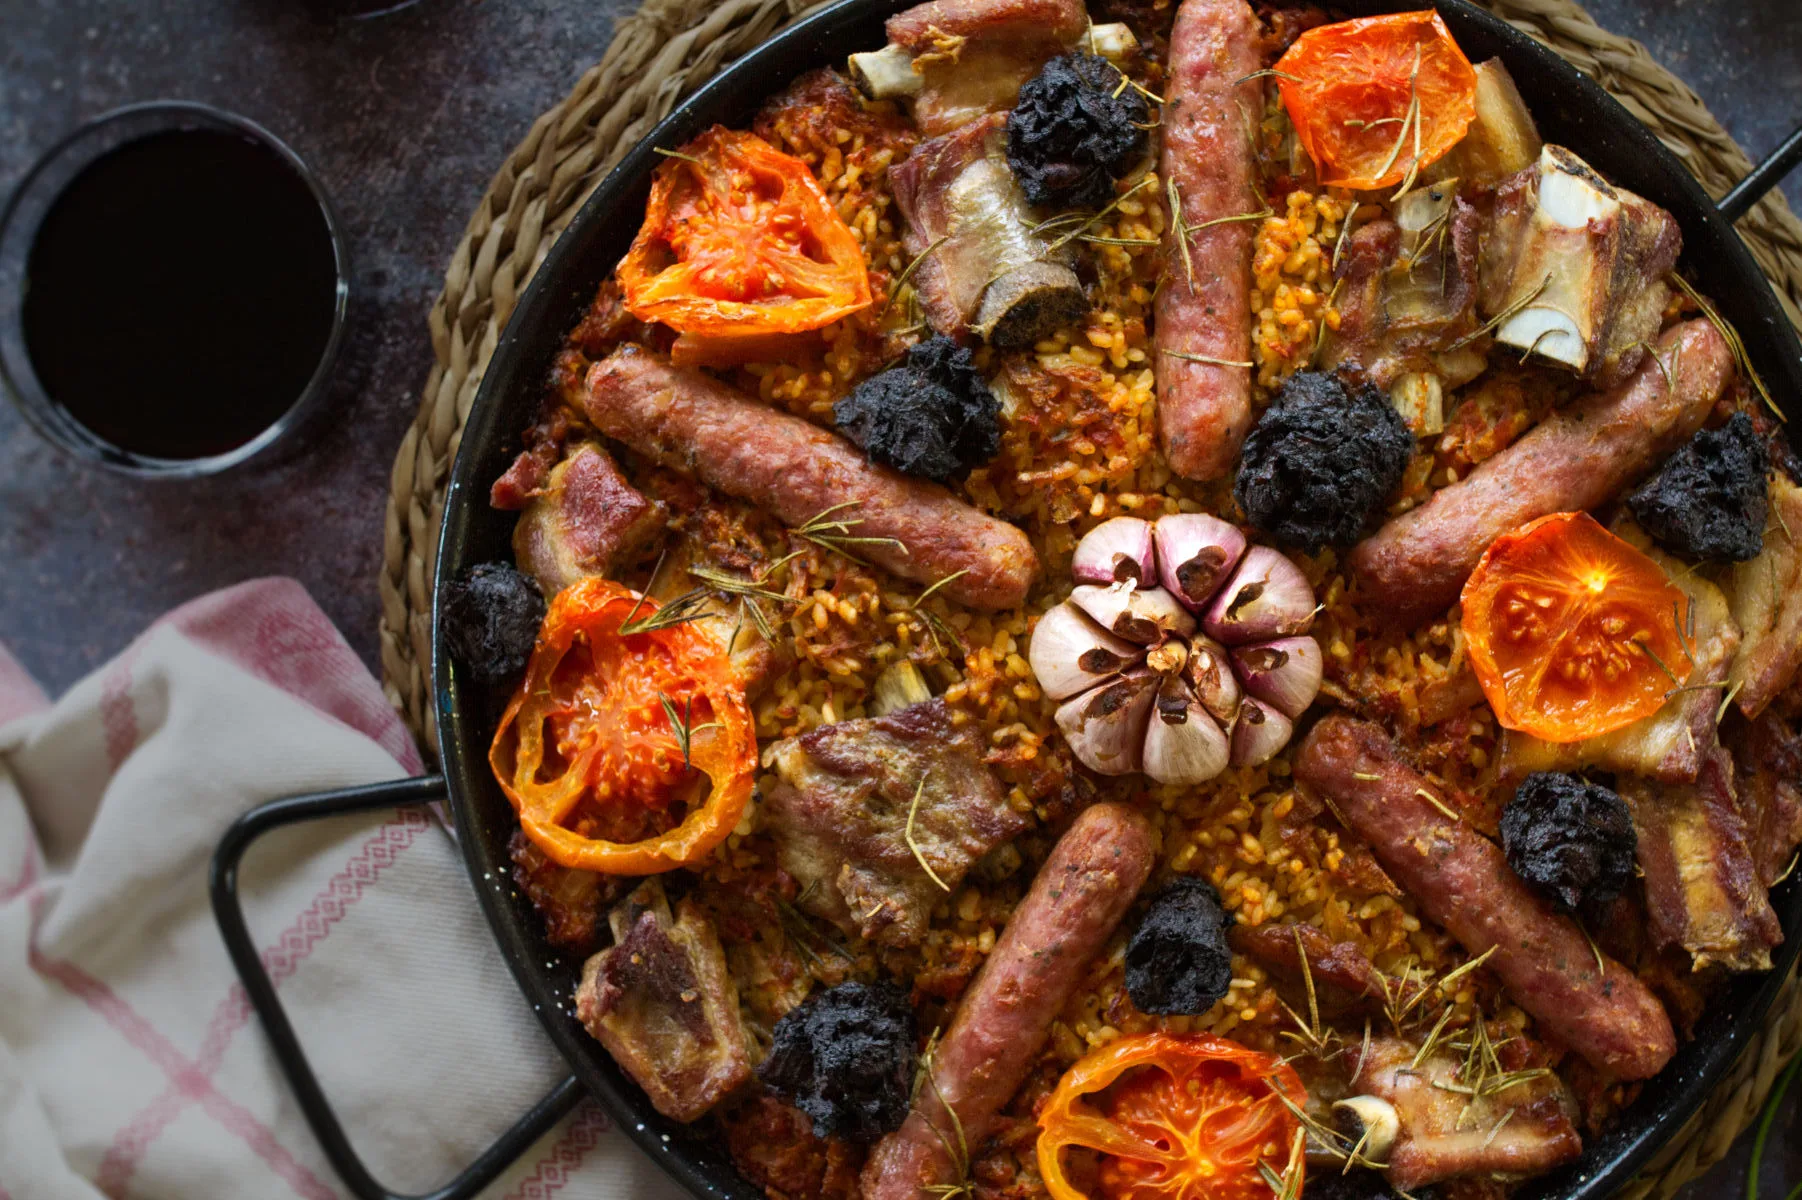 a large pan of arroz al horno sits beside some glasses of red wine.